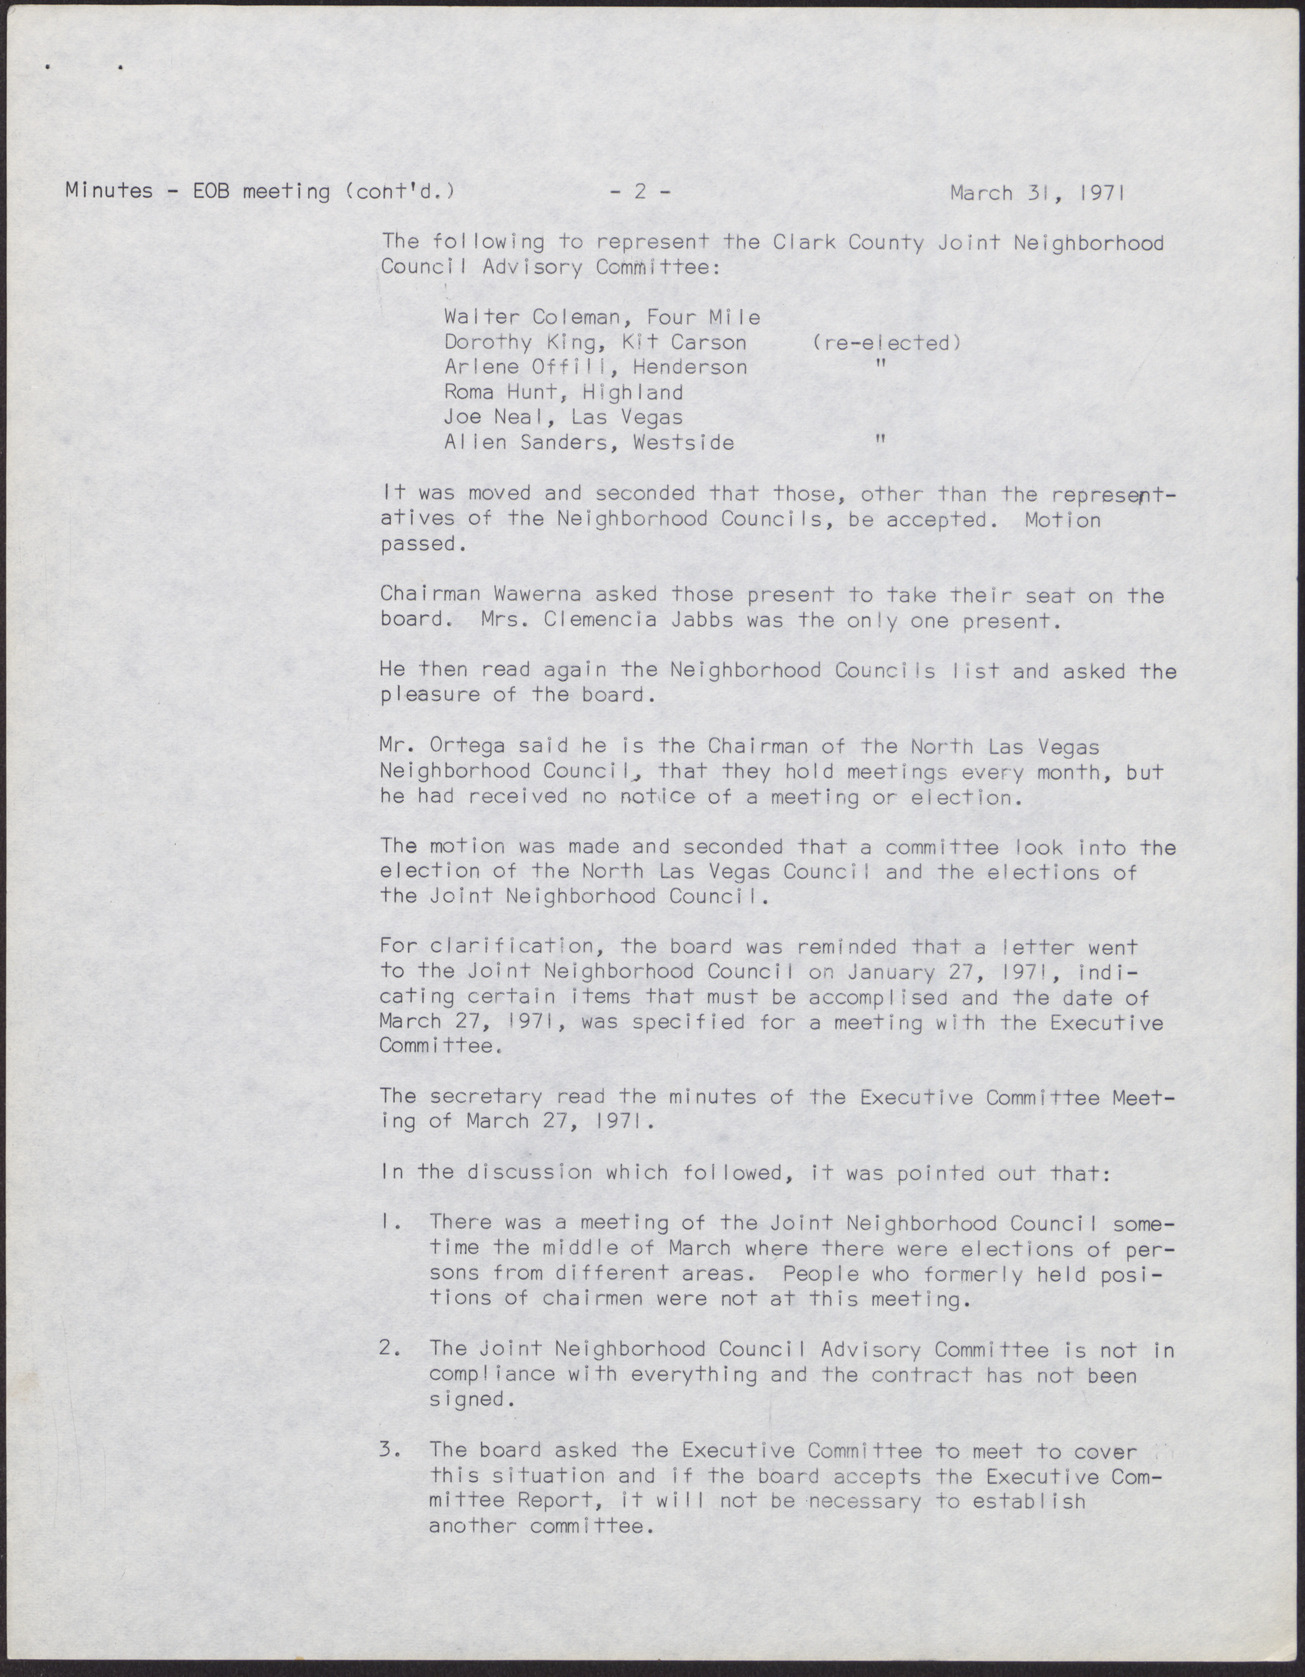 Minutes from Economic Opportunity Board meeting (9 pages), March 31, 1971, page 2